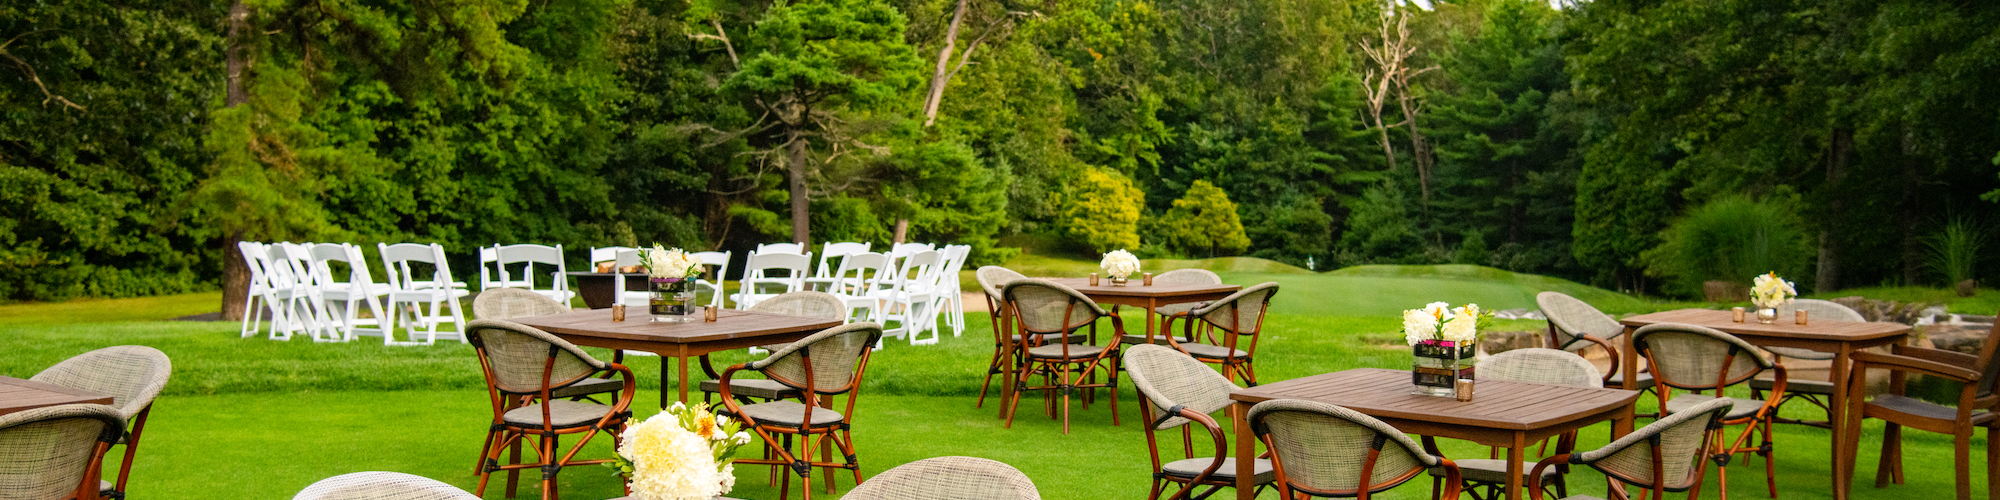 A luxury picnic setup by the tranquil waterfall garden at The Preserve Resort & Spa, an exclusive event venue.